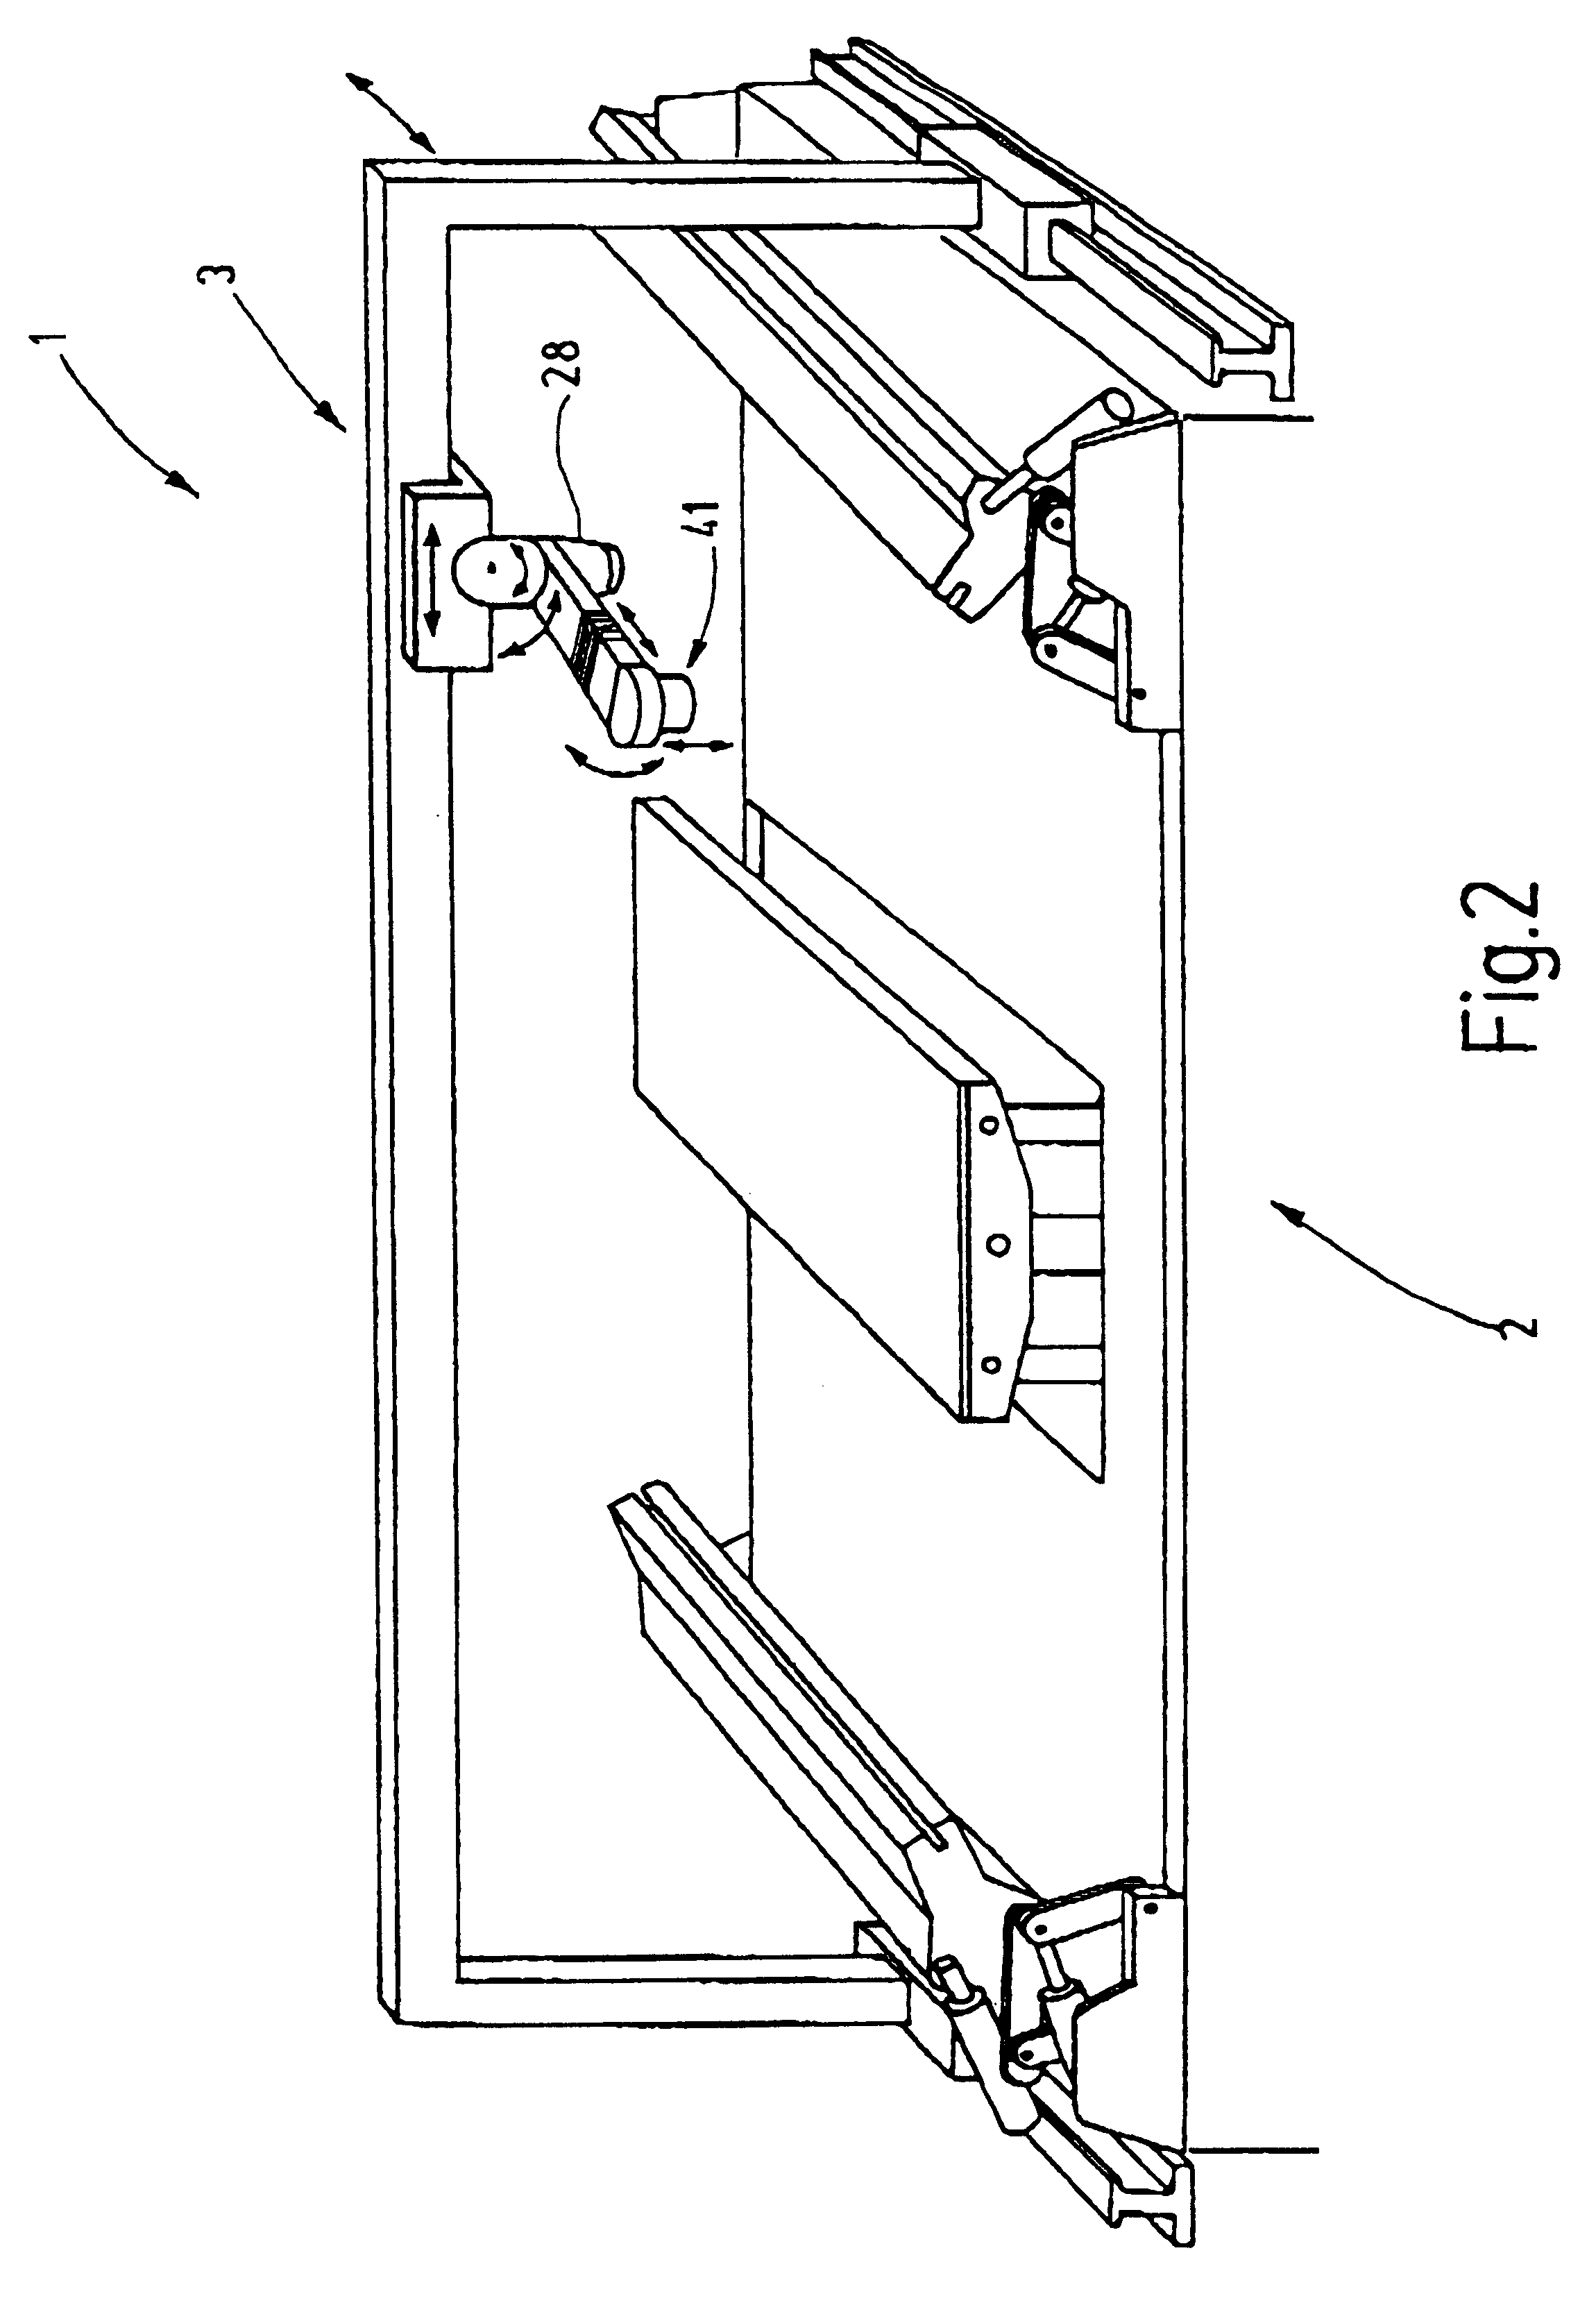 Laser stretch-forming processing apparatus for sheet metal